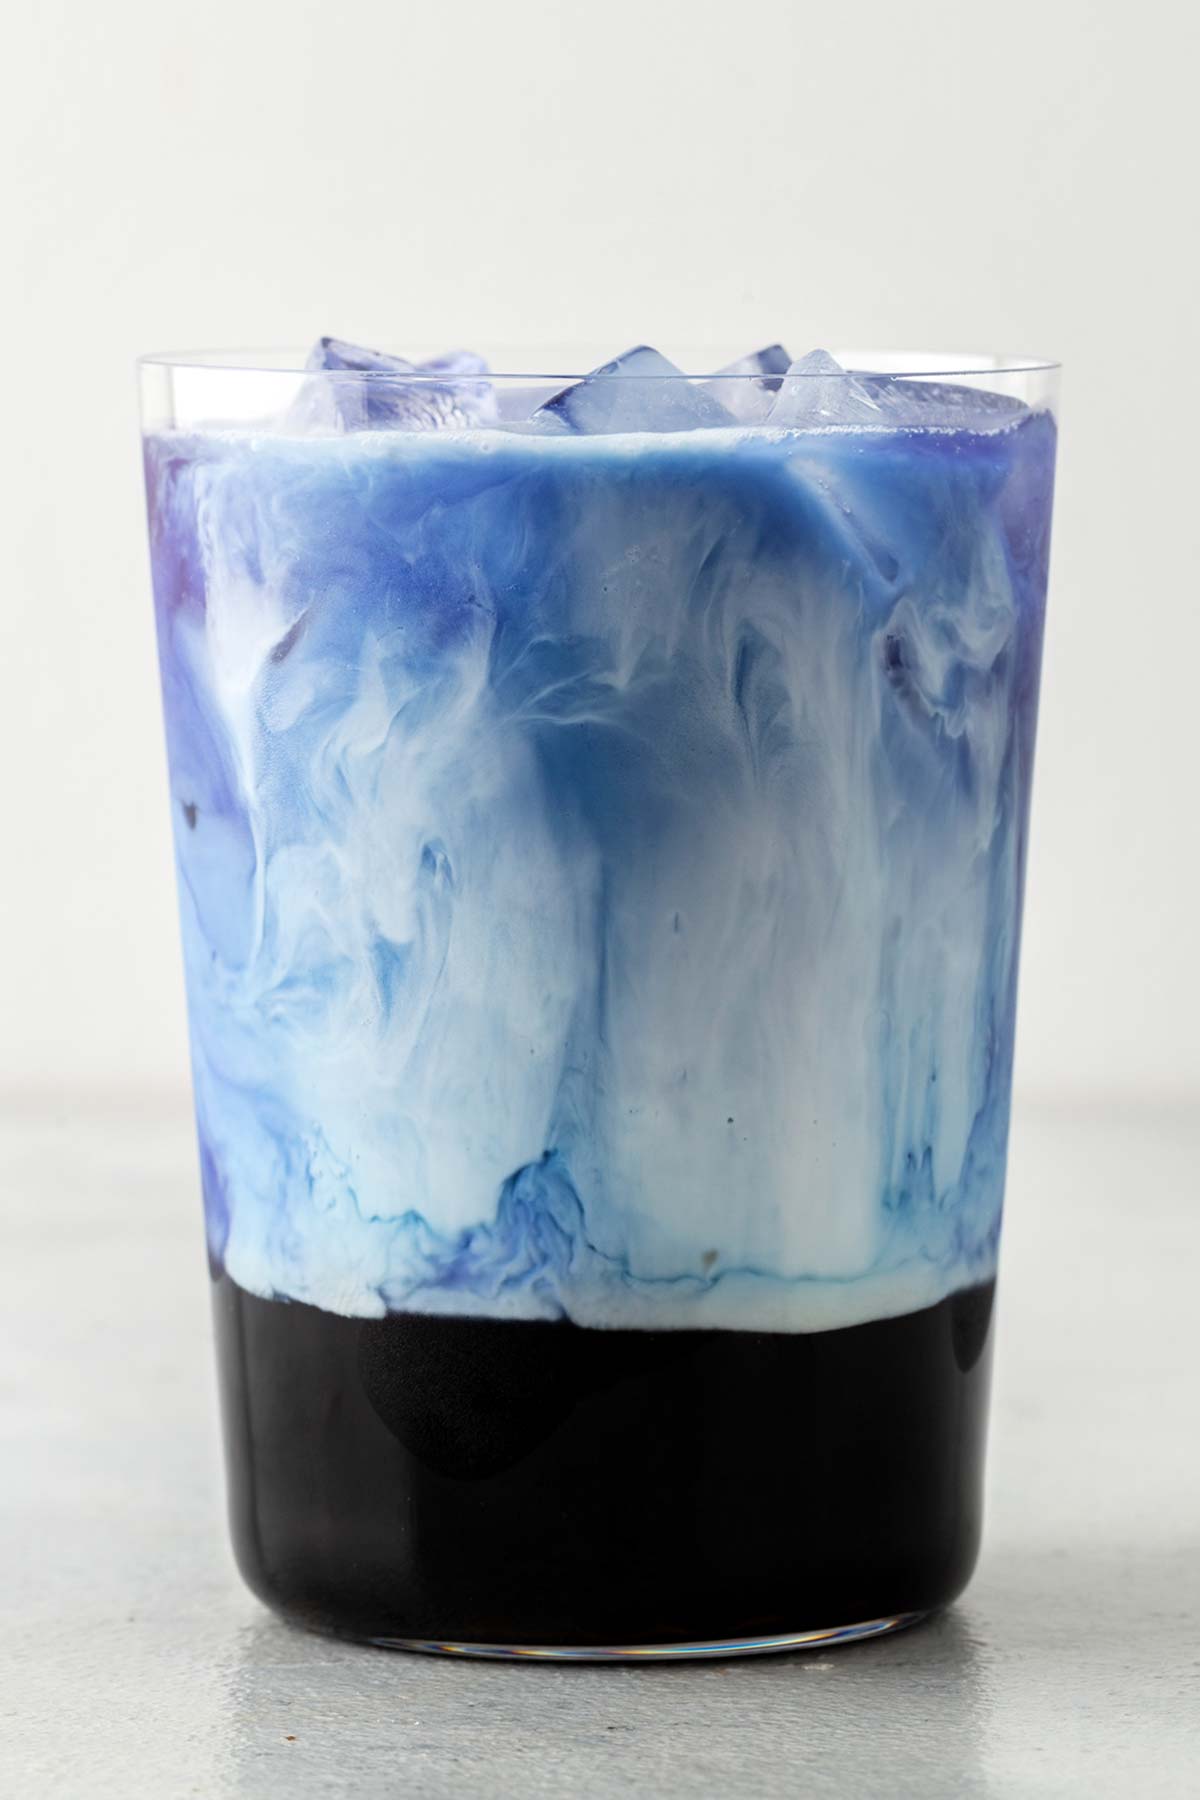 Butterfly Pea Flower Bubble Tea (Butterfly Pea Flower Milk Tea with Boba) with the blue tea and white milk swirling together in a glass.